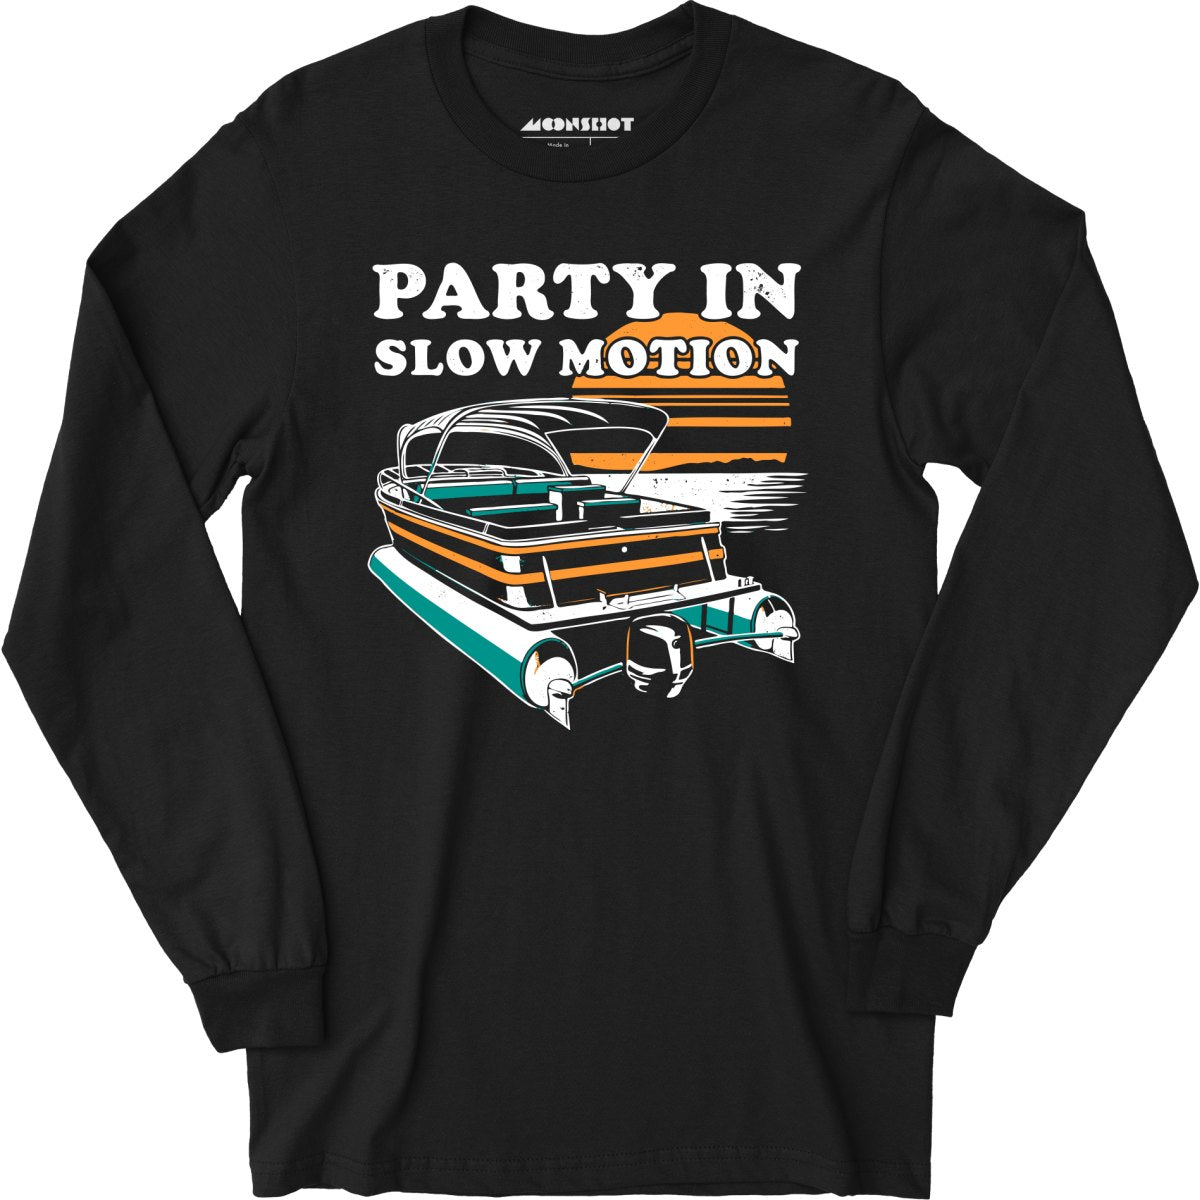 Party in Slow Motion - Long Sleeve T-Shirt